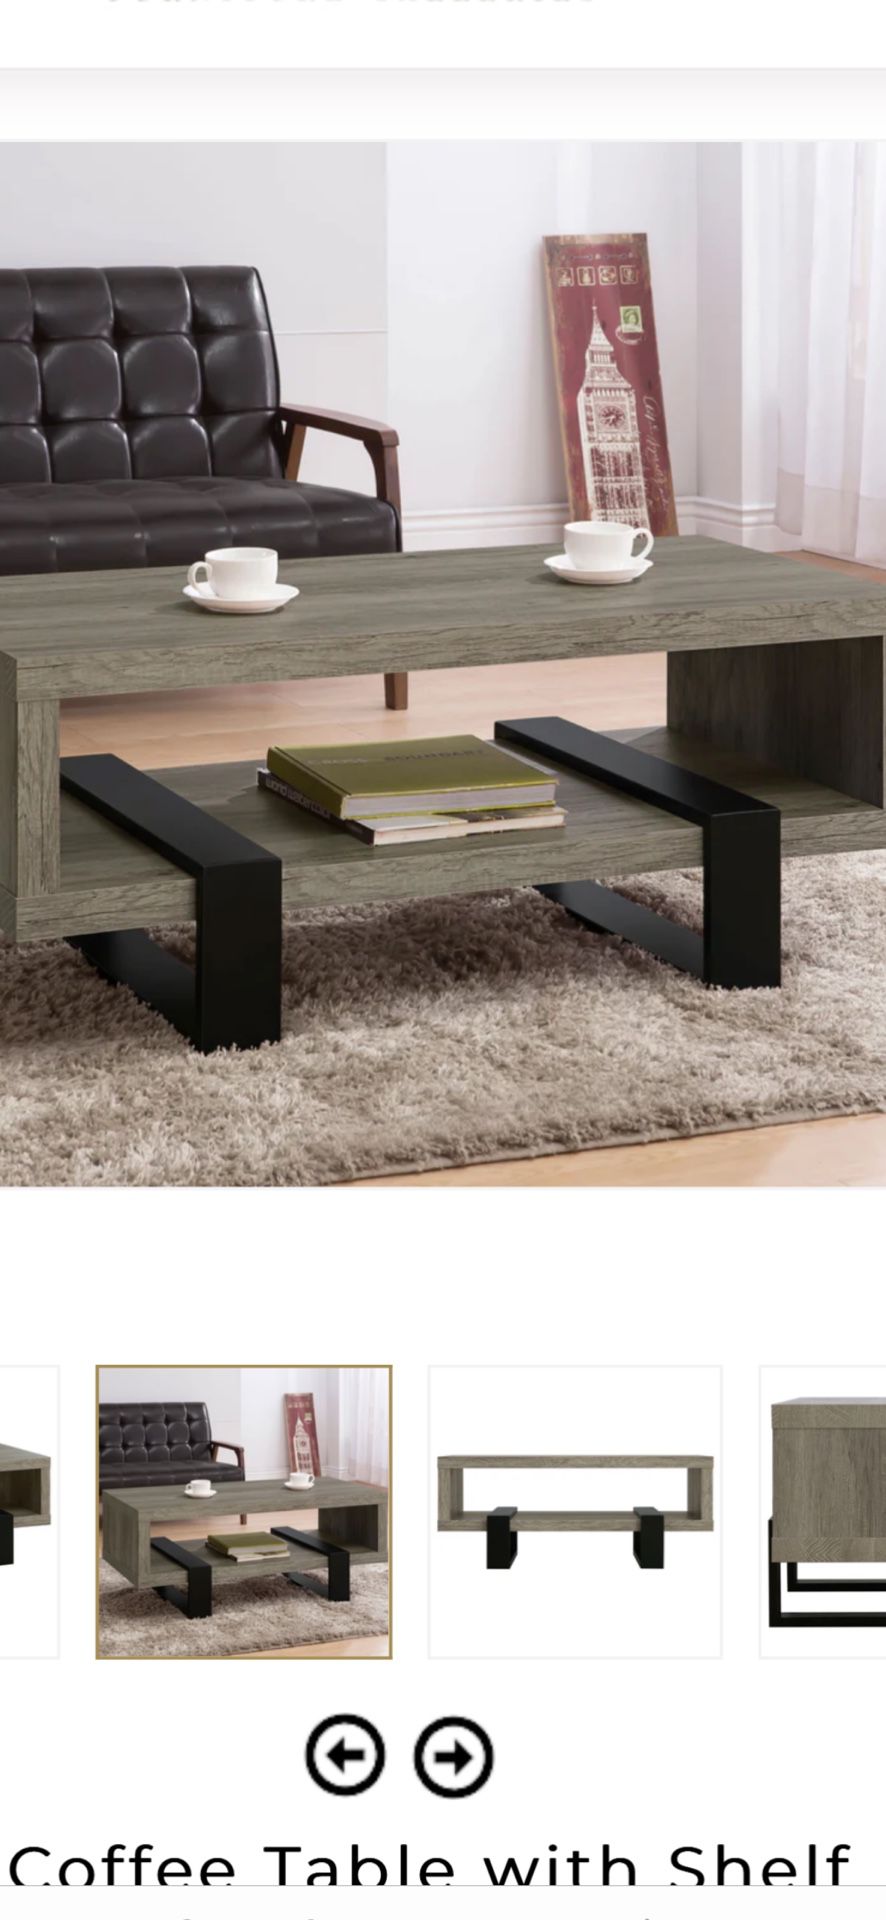 Viktor Coffee Table with Shelves